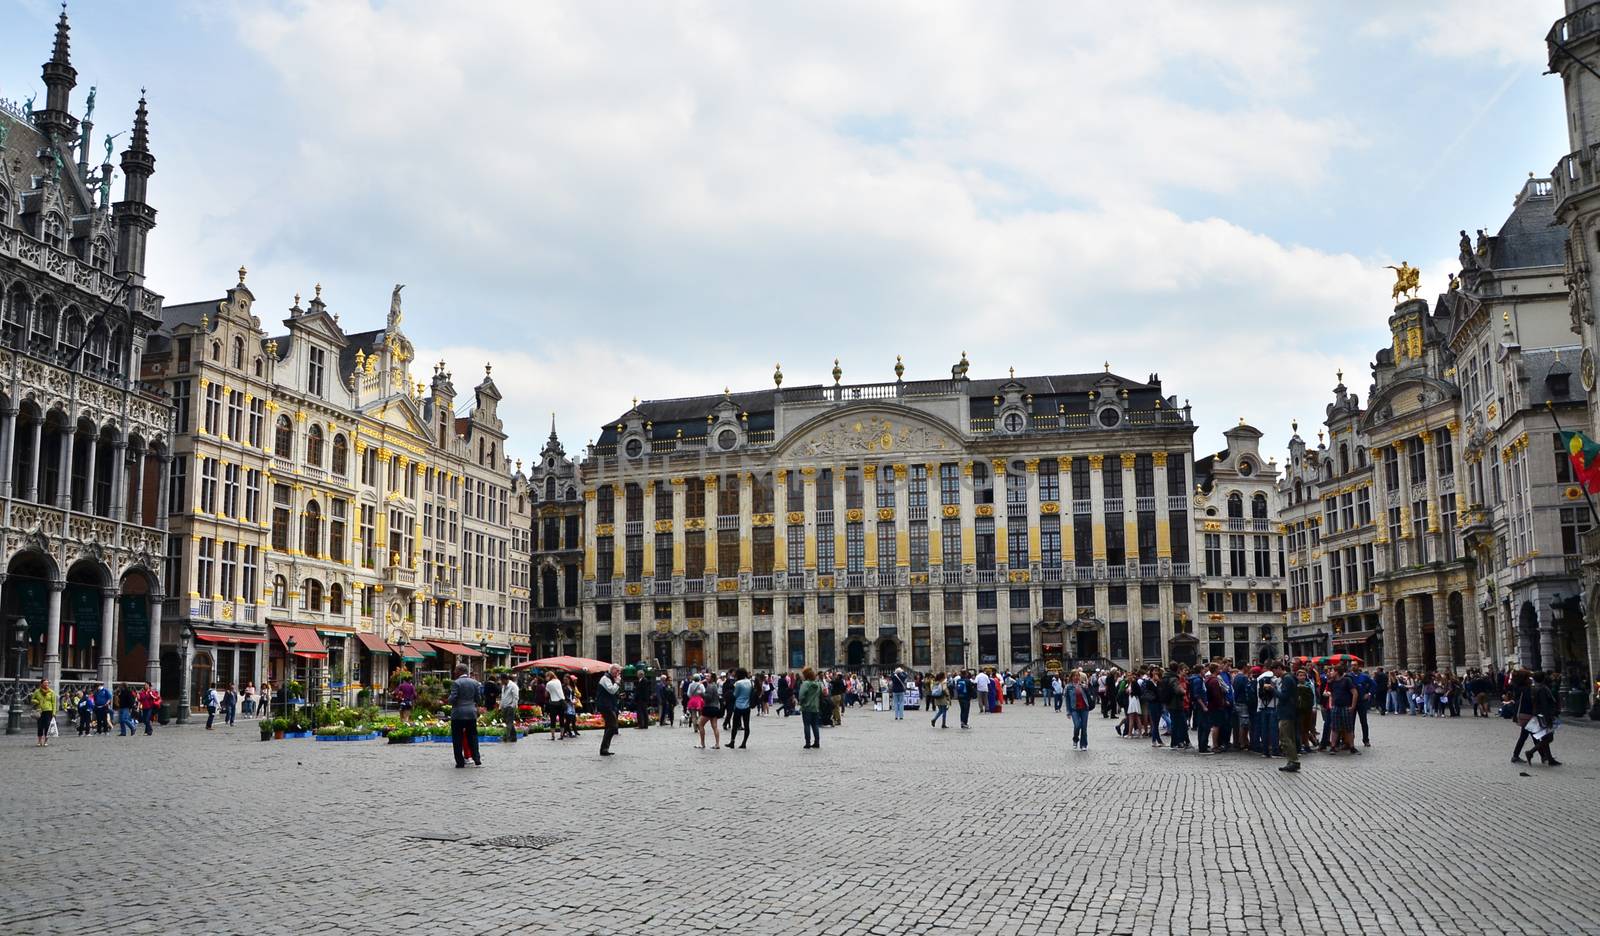 Brussels, Belgium - May 12, 2015: Tourists visiting famous Grand Place of Brussels.